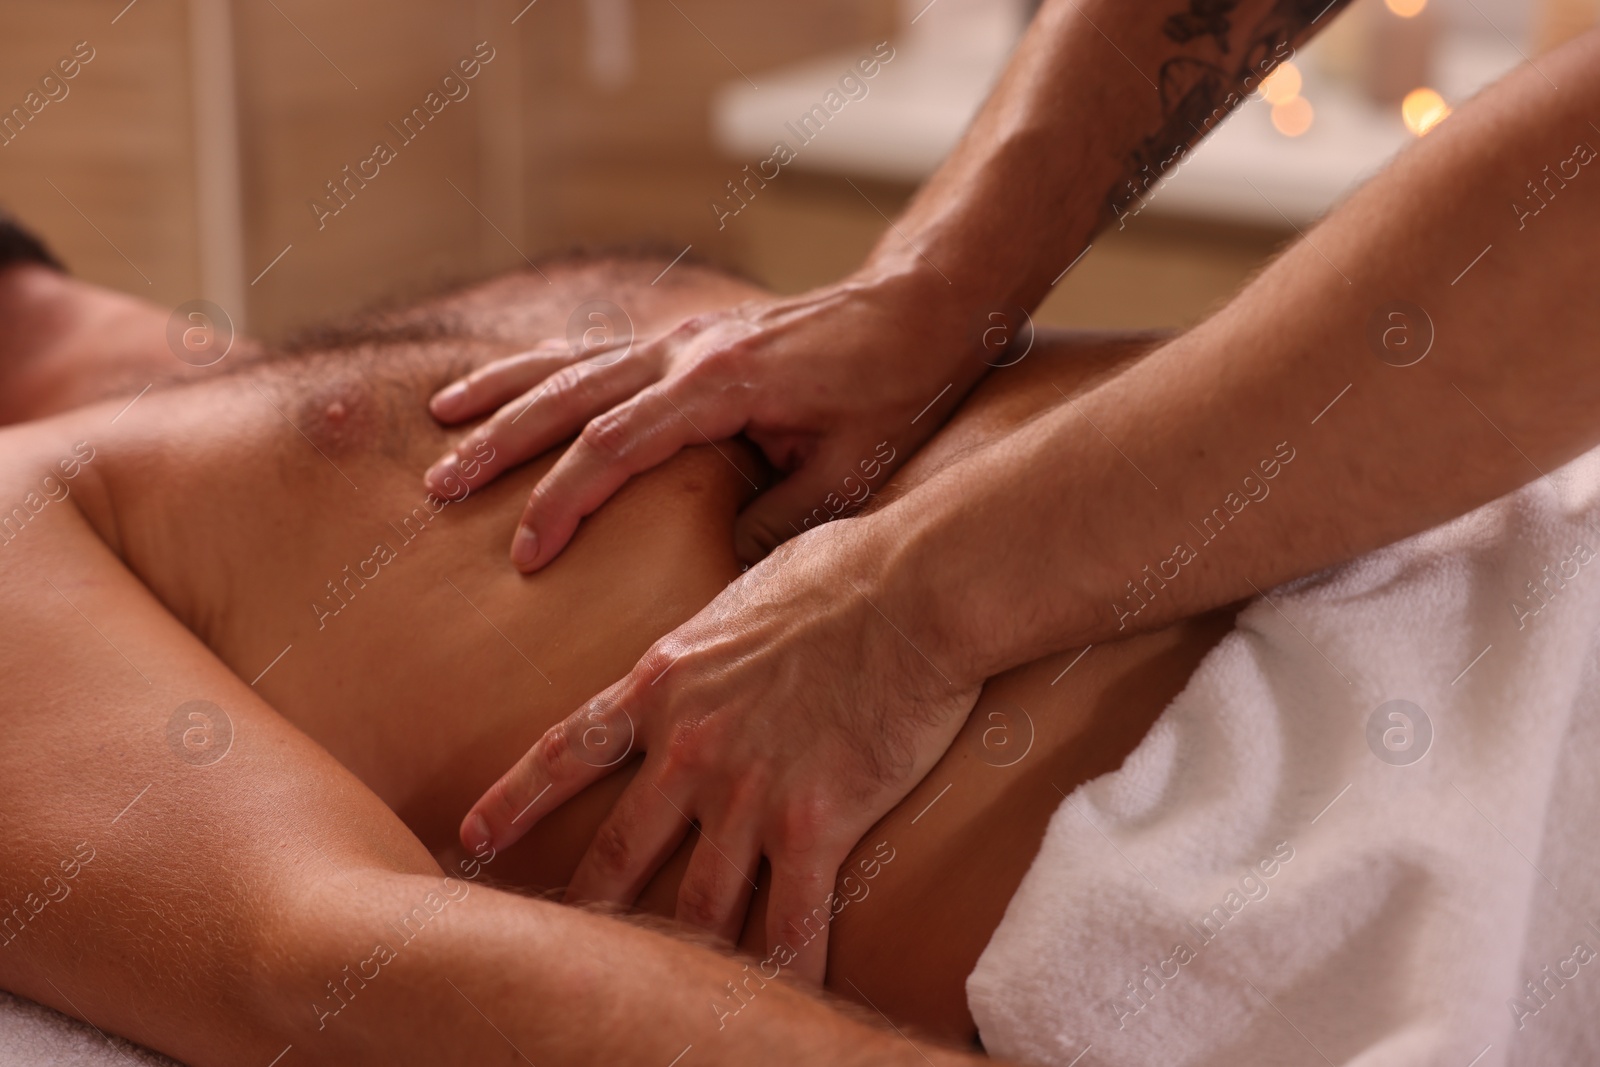 Photo of Man receiving professional belly massage in spa salon, closeup